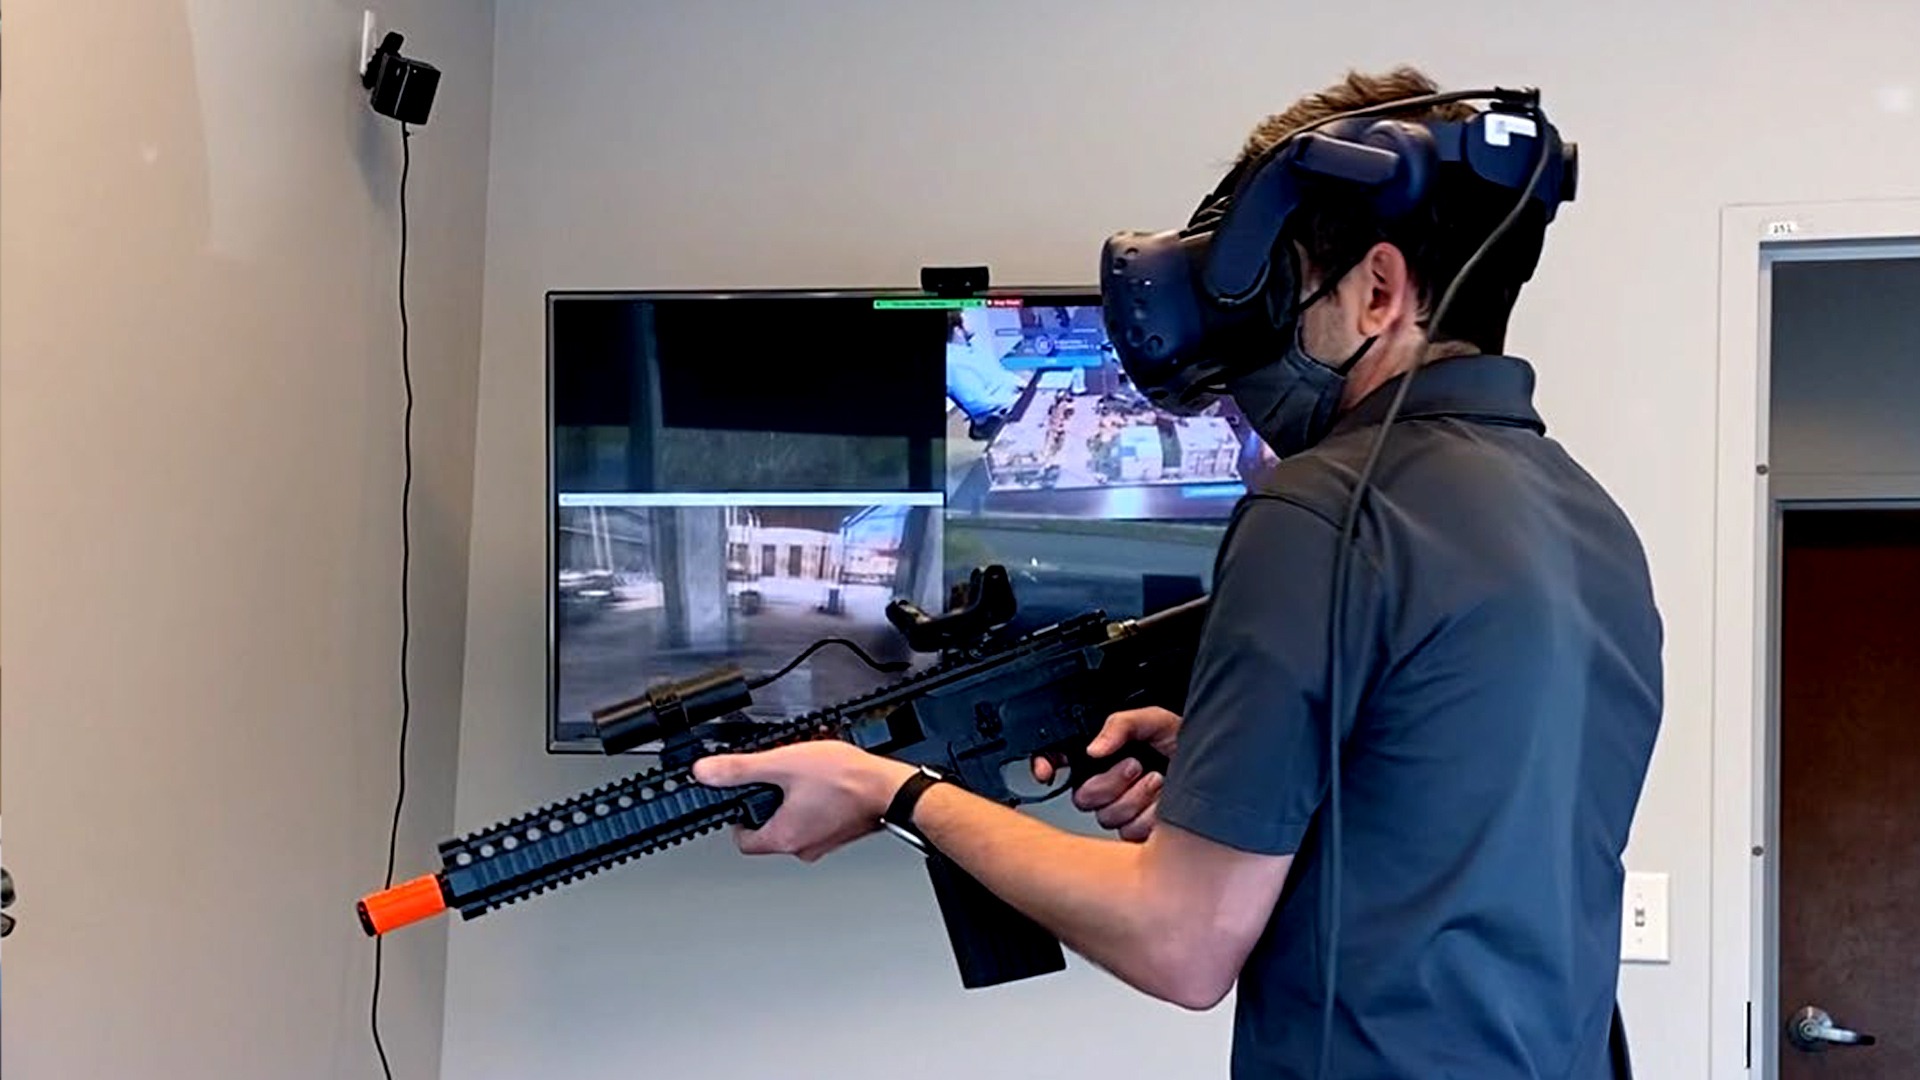 Player using VR Headset.